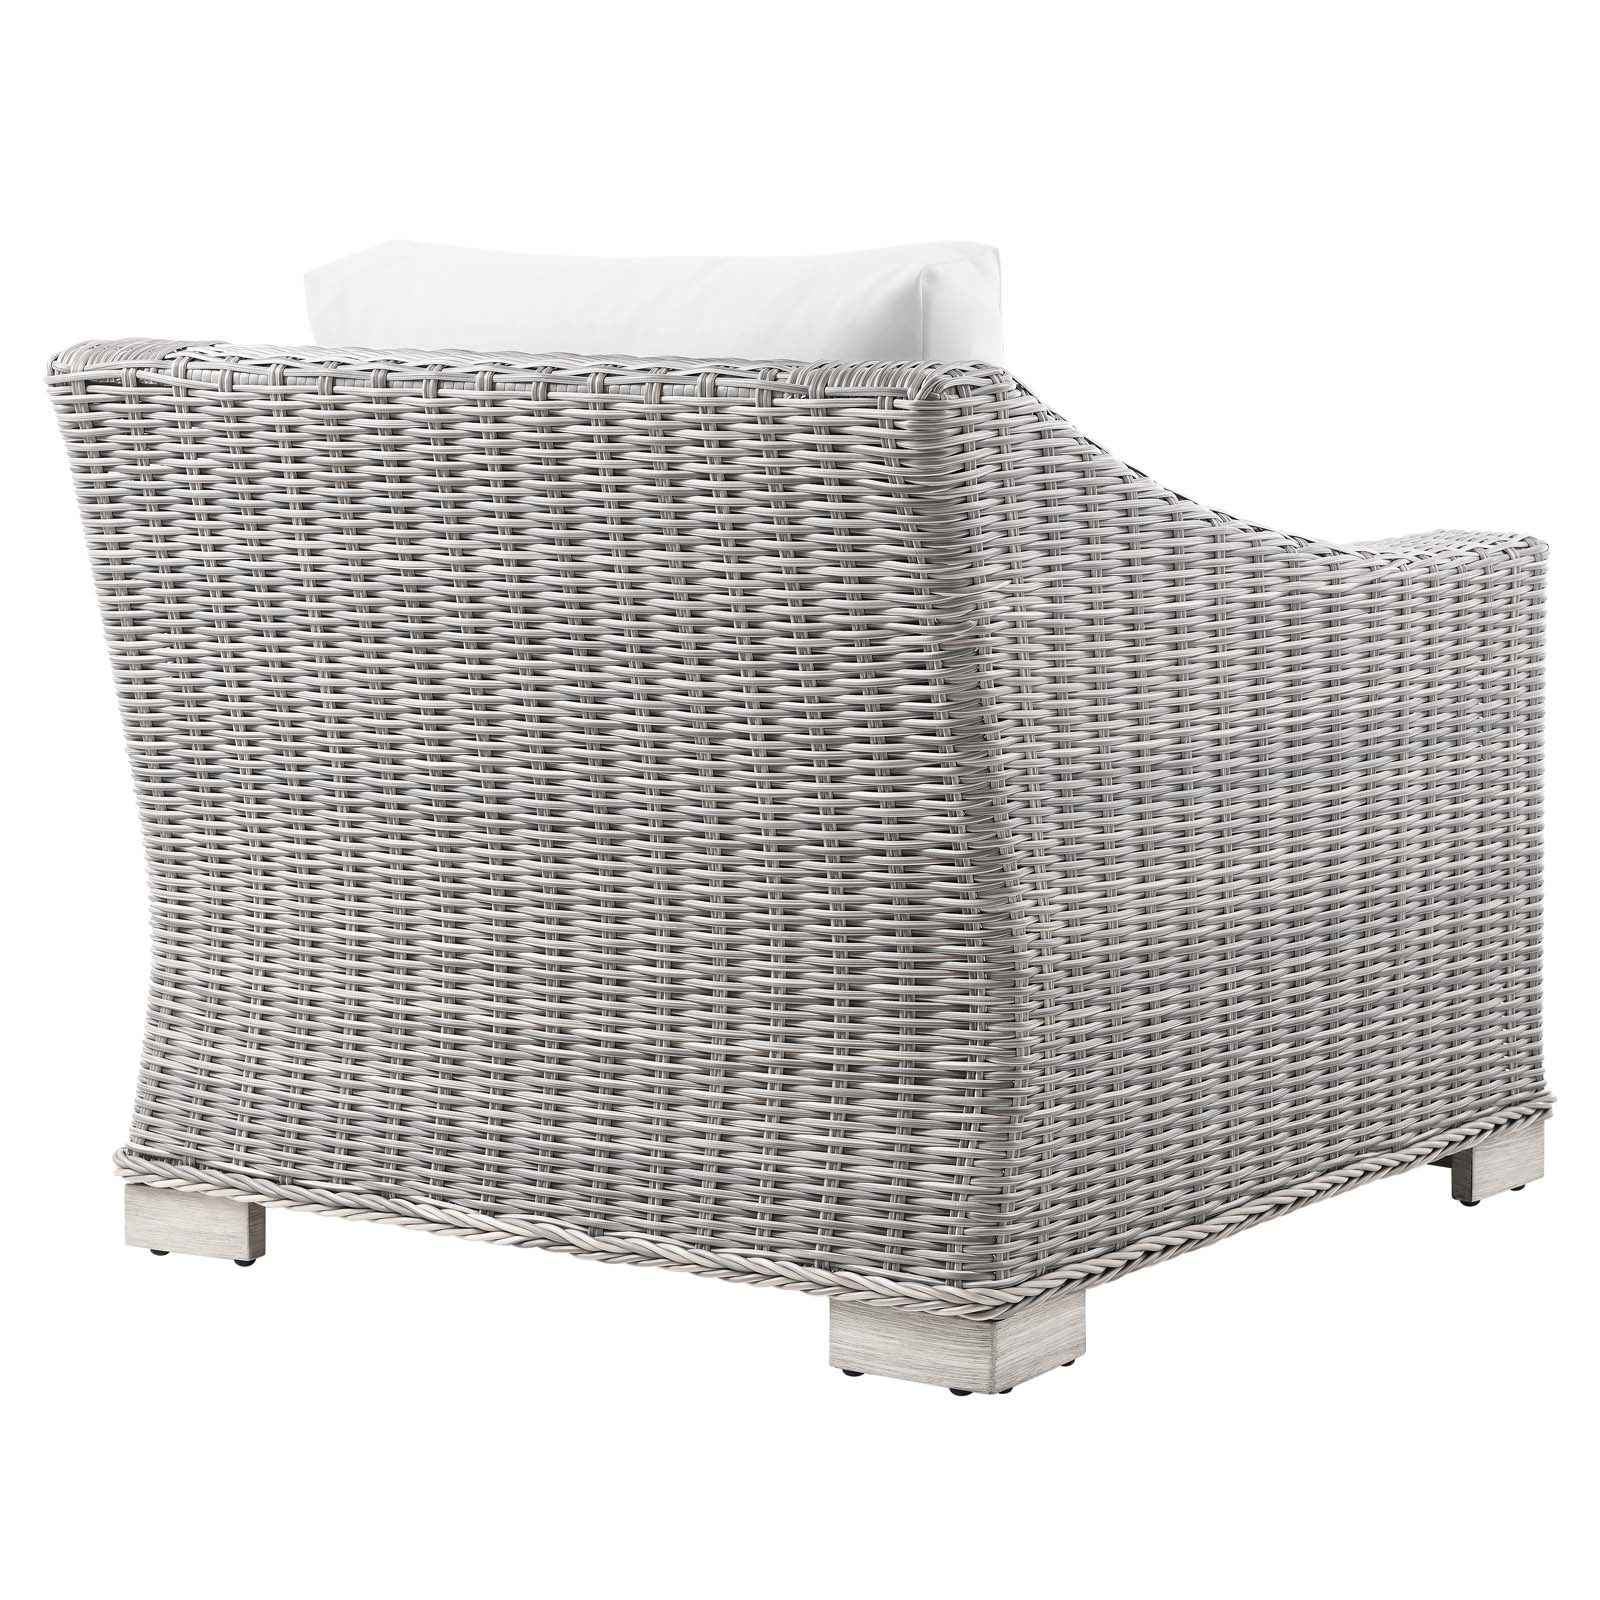 Modway Outdoor Chairs - Conway Outdoor Patio Wicker Rattan Armchair Light Gray White